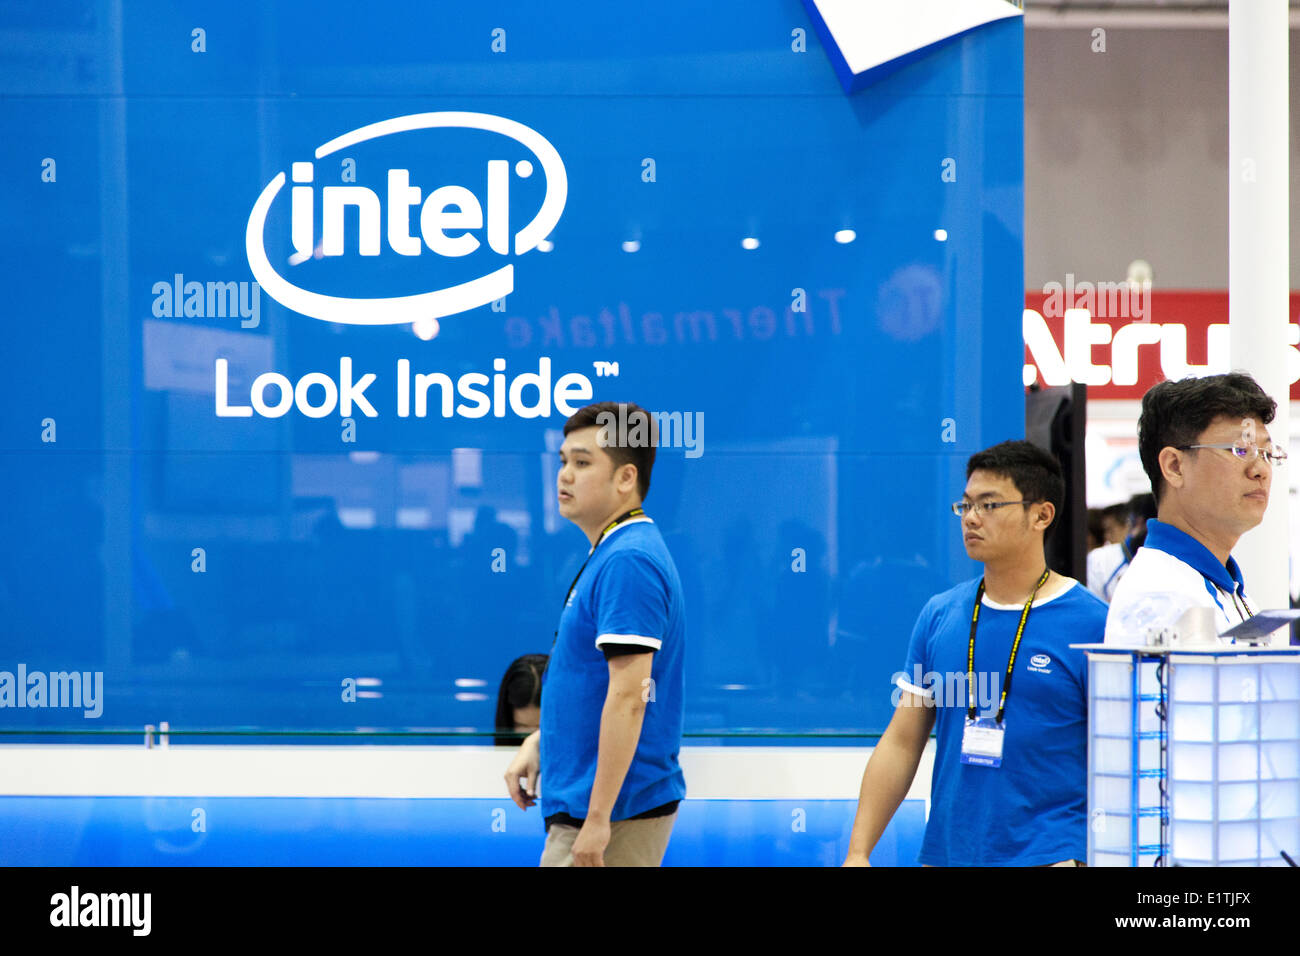 Intel booth at Computex 2014, Taipei, Taiwan, June 7, 2014. Computex is one of the largest computer and technology fairs in the world. (CTK Photo/Karel Picha) Stock Photo